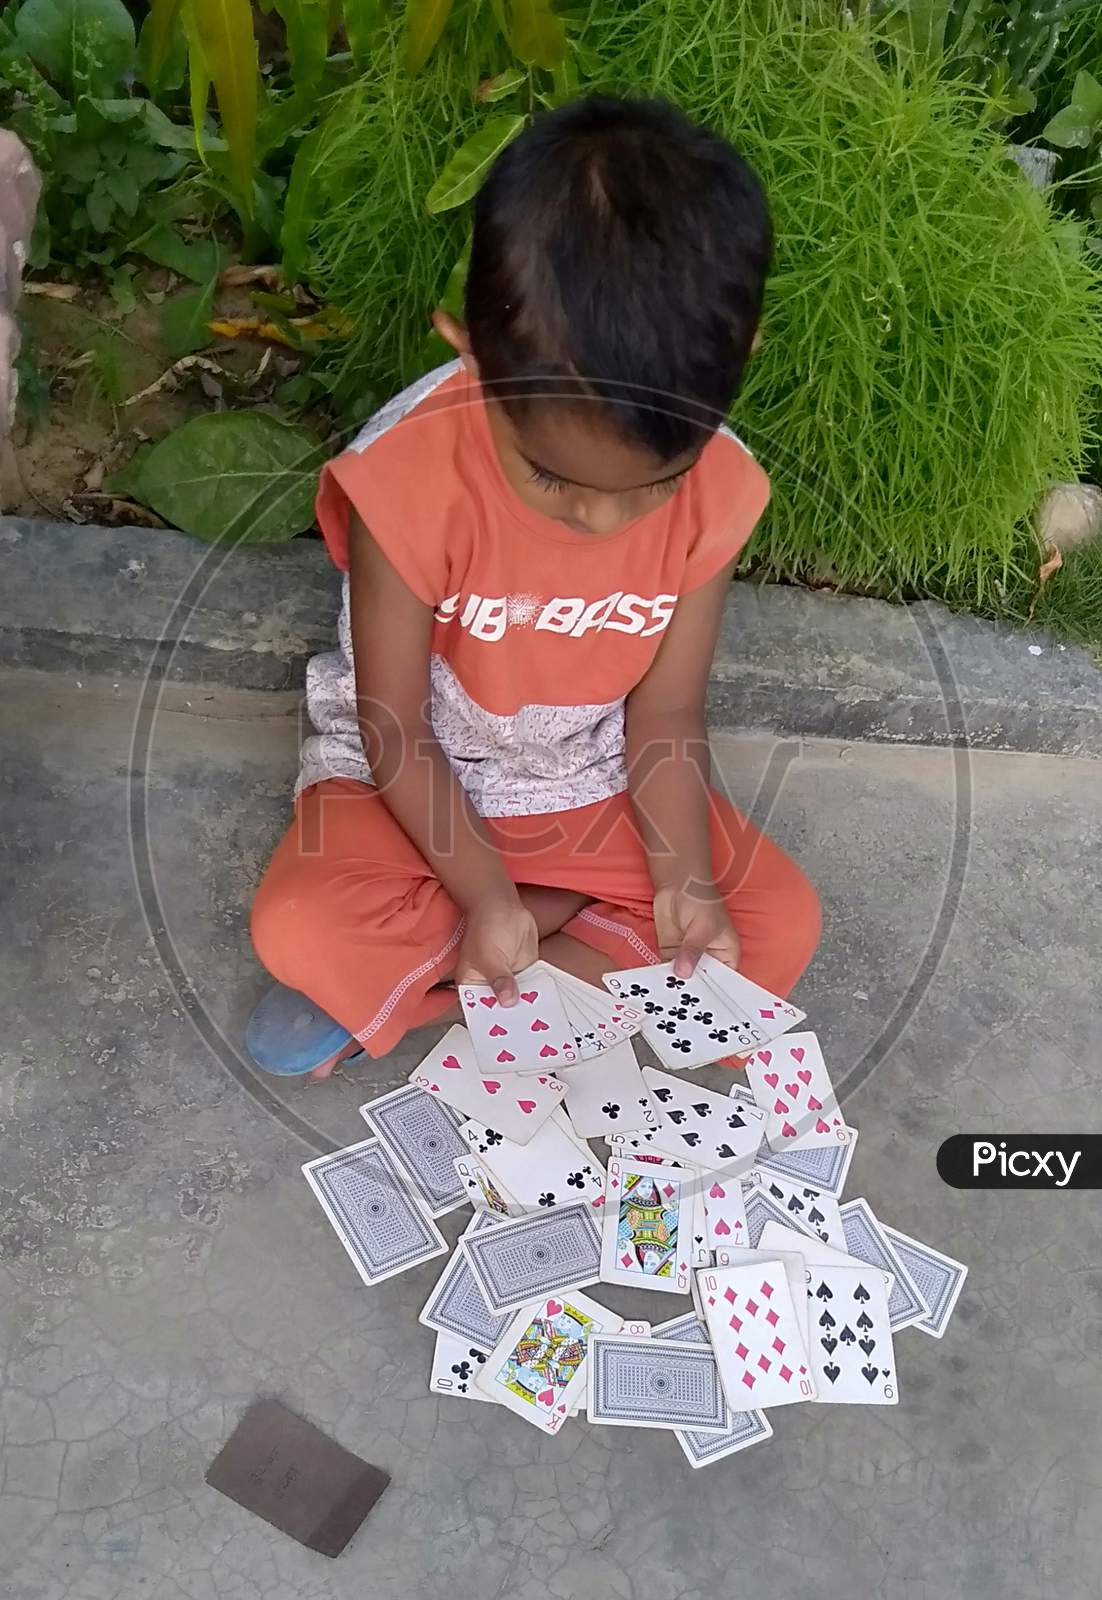 A baby people played by CARDS game in downs